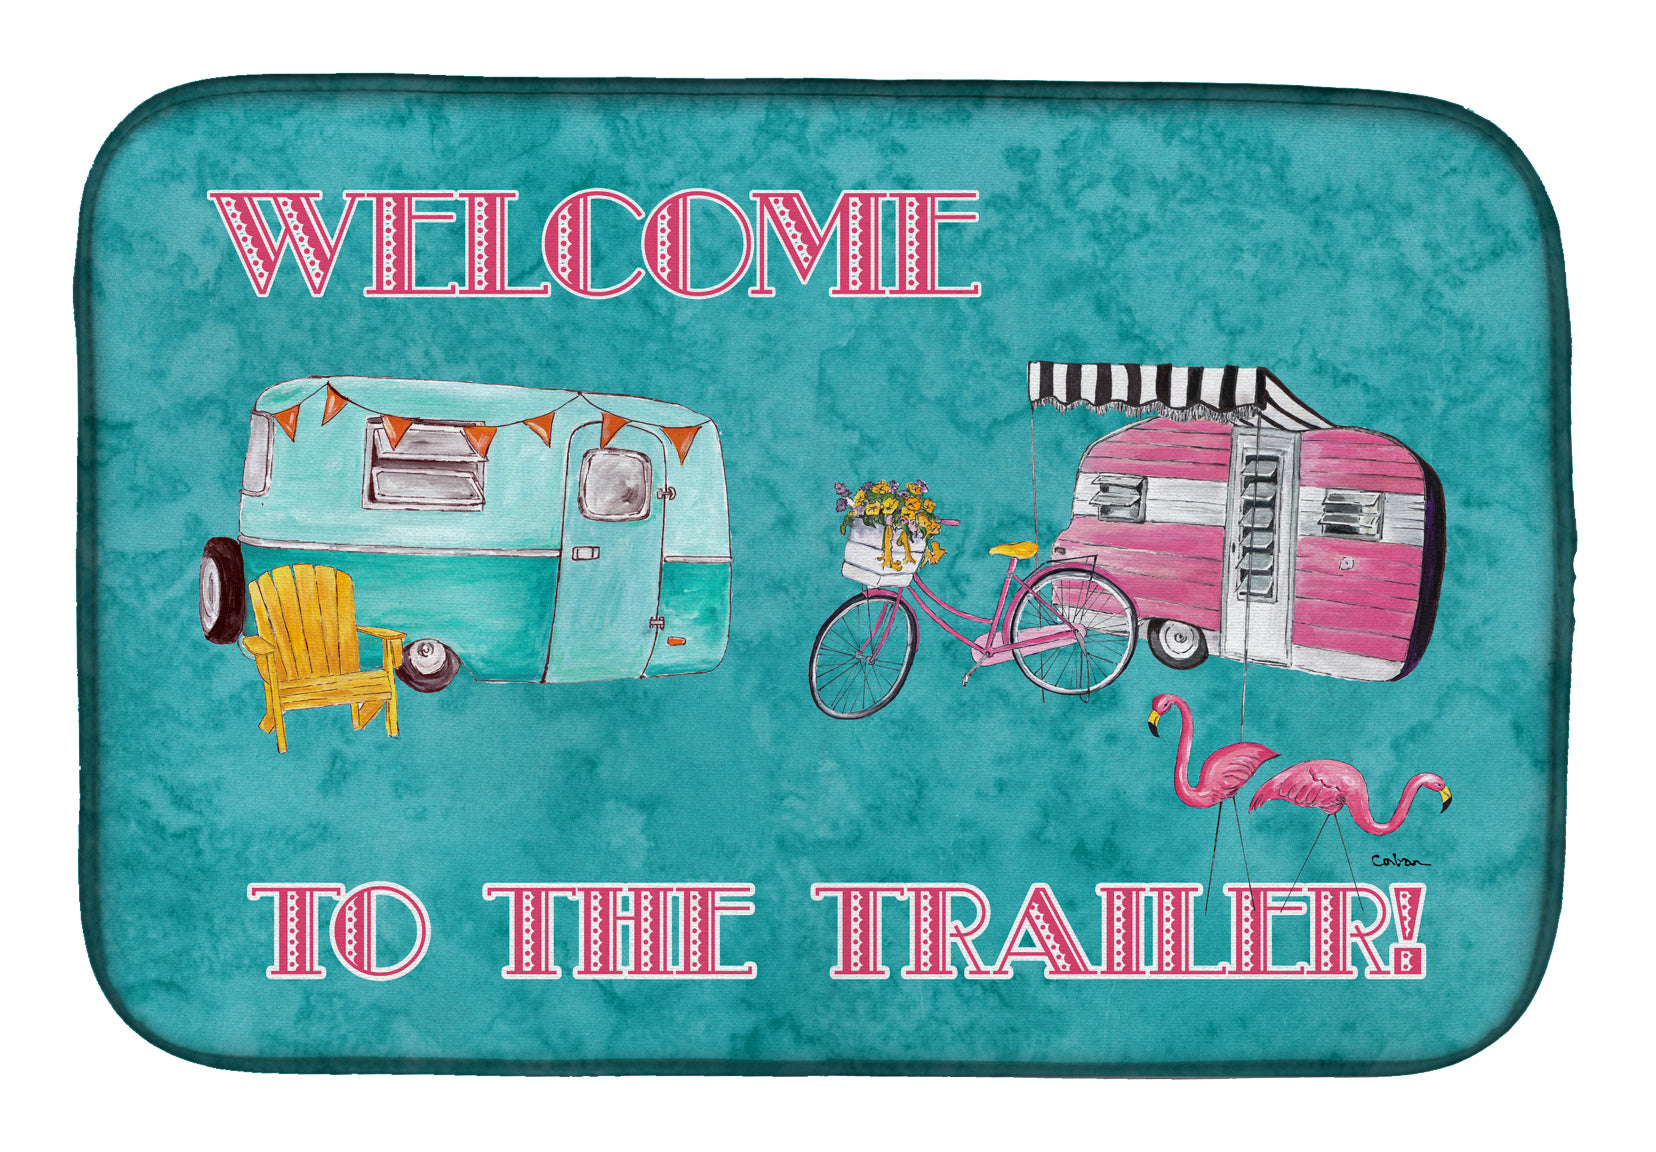 Welcome to the Trailer Dish Drying Mat 8760DDM  the-store.com.